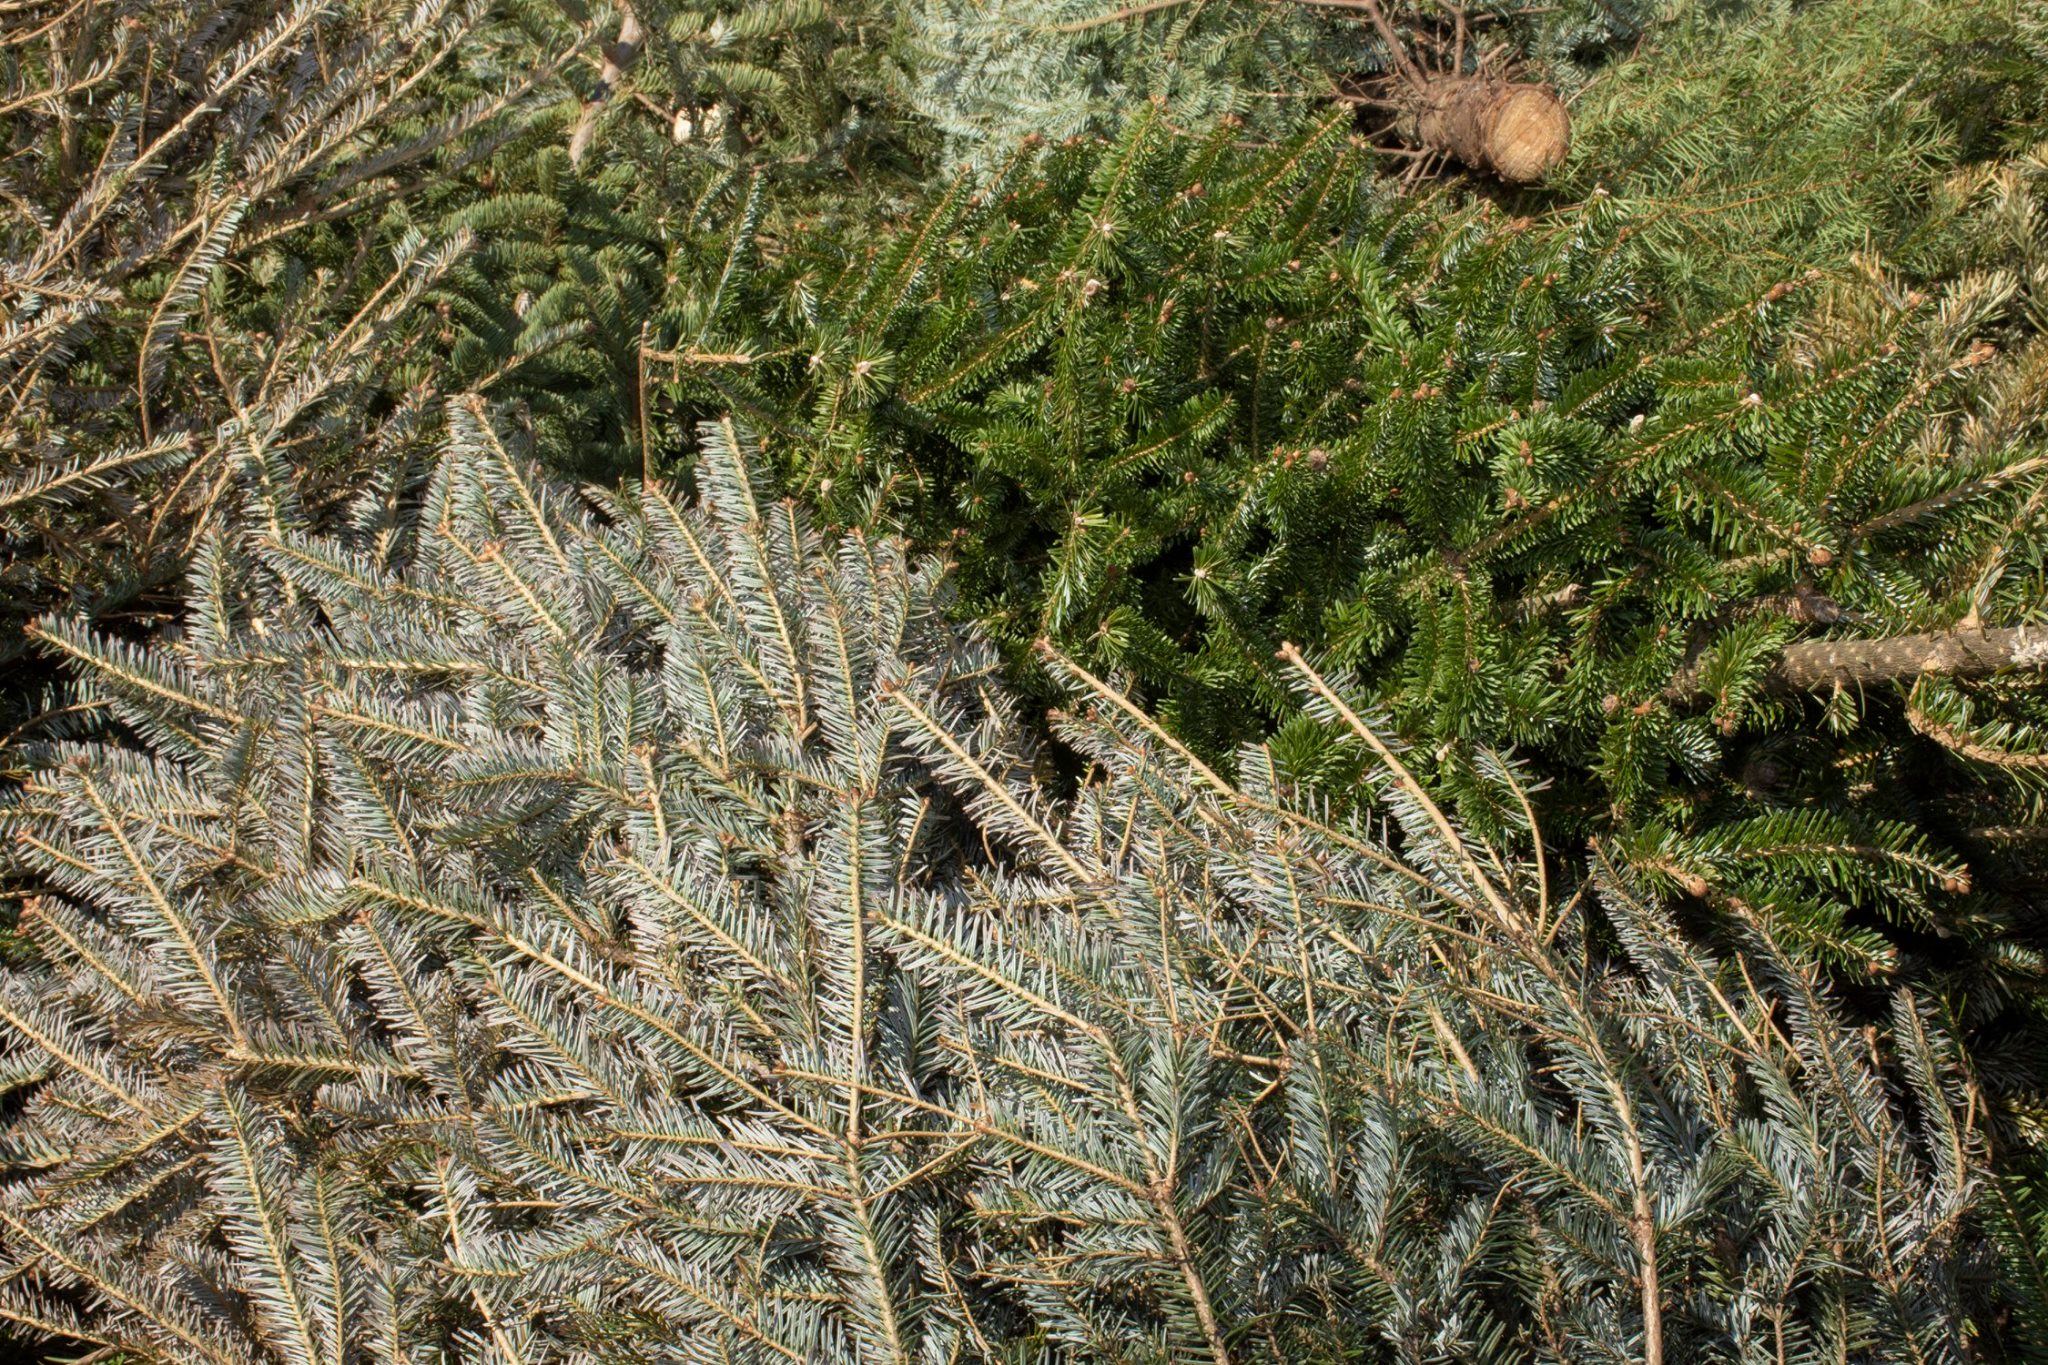 A pile of holiday trees to be recycled at Zilker Park